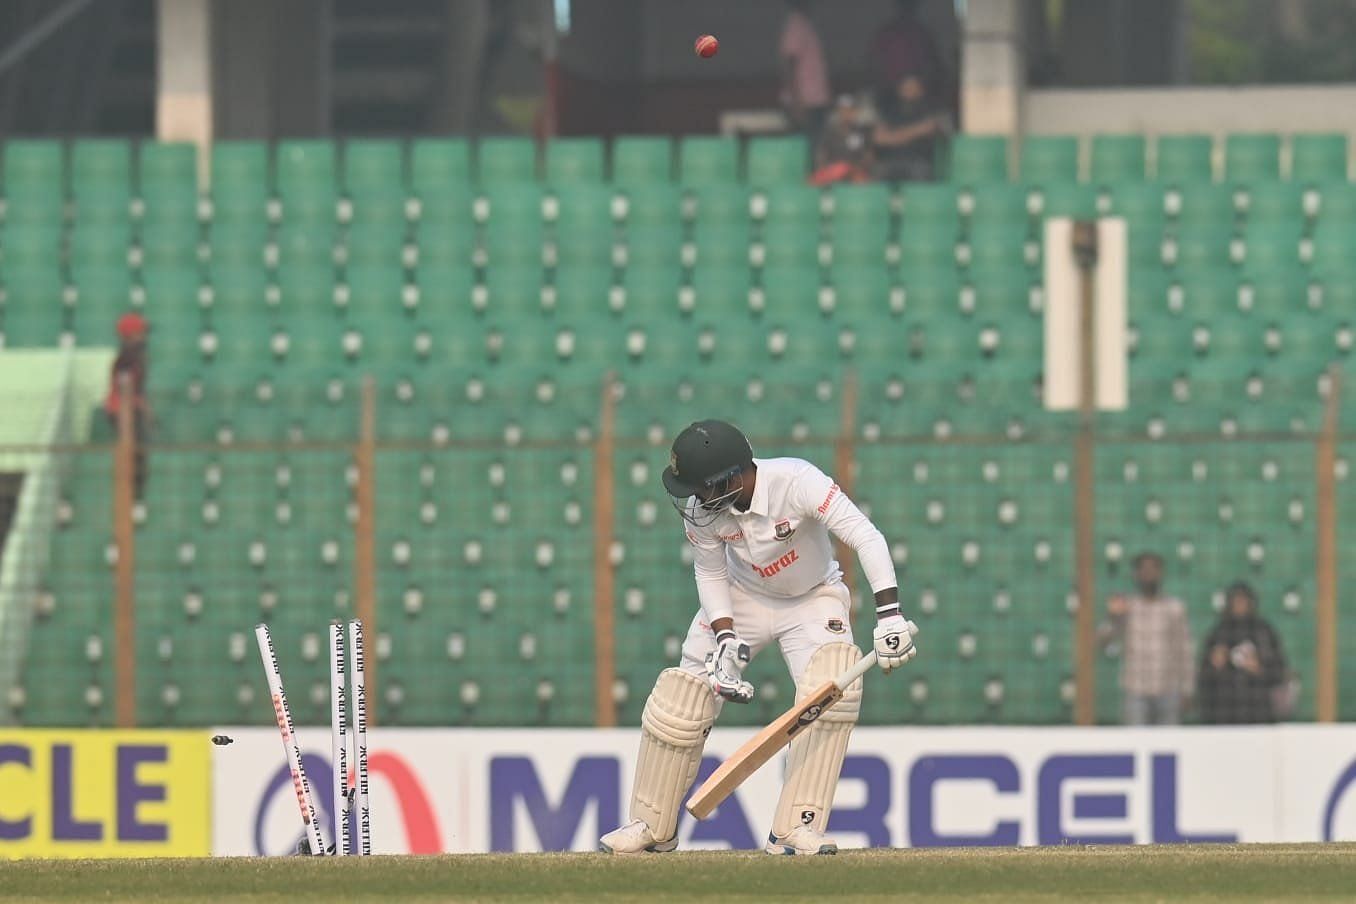 None of the Bangladesh batters put up a fight on Day 2 of the Chattogram Test. [P/C: Twitter]